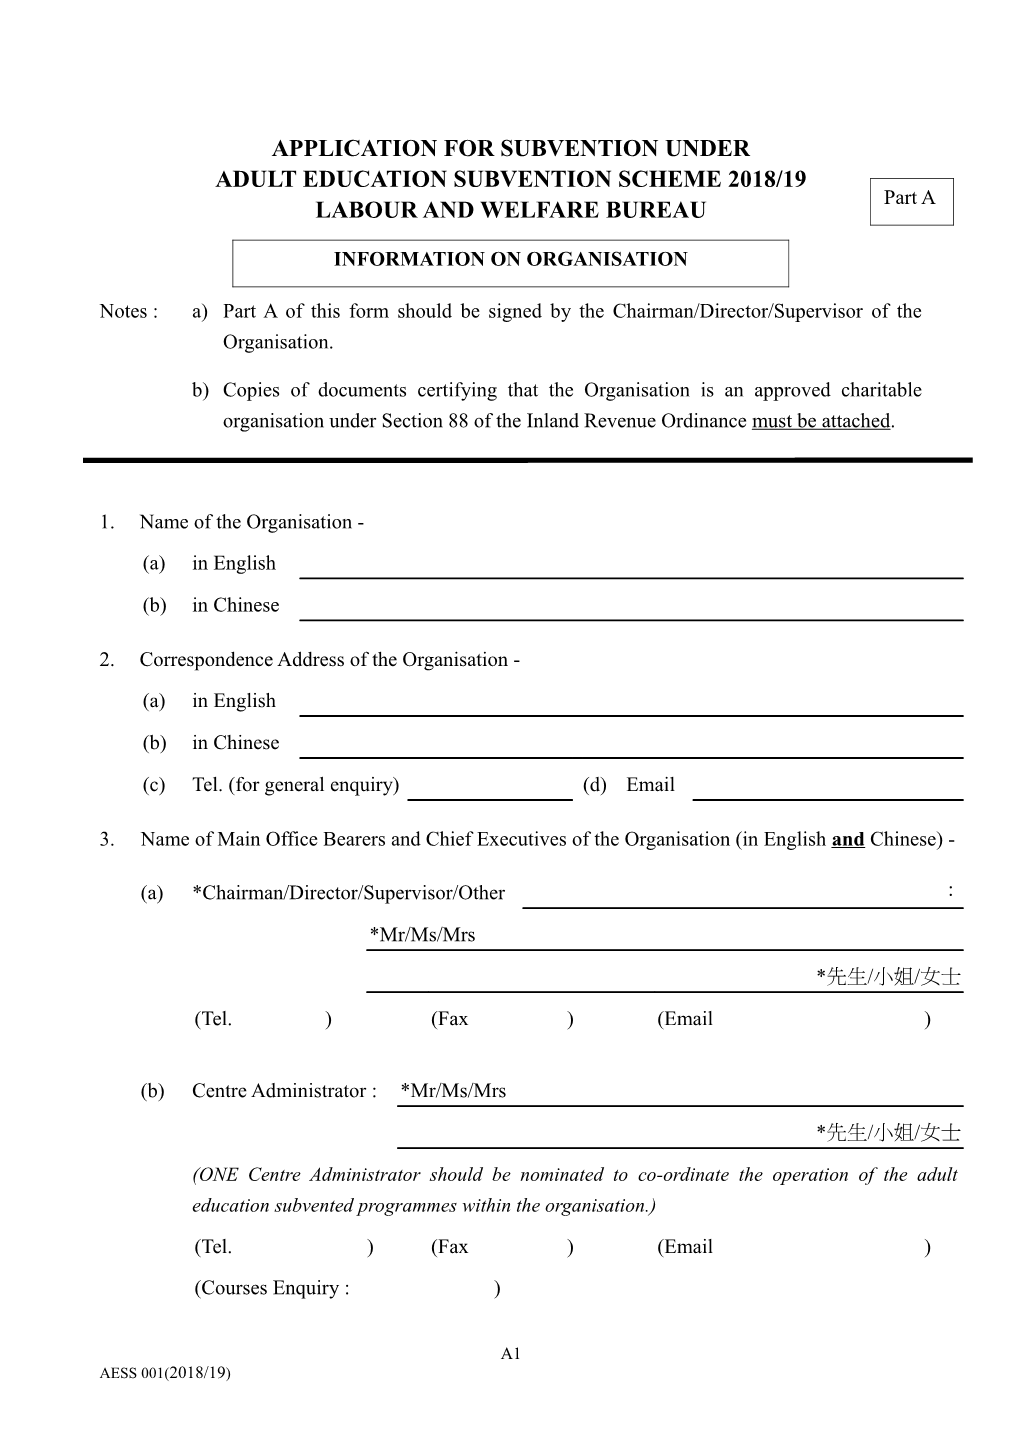 Application for Subvention Under